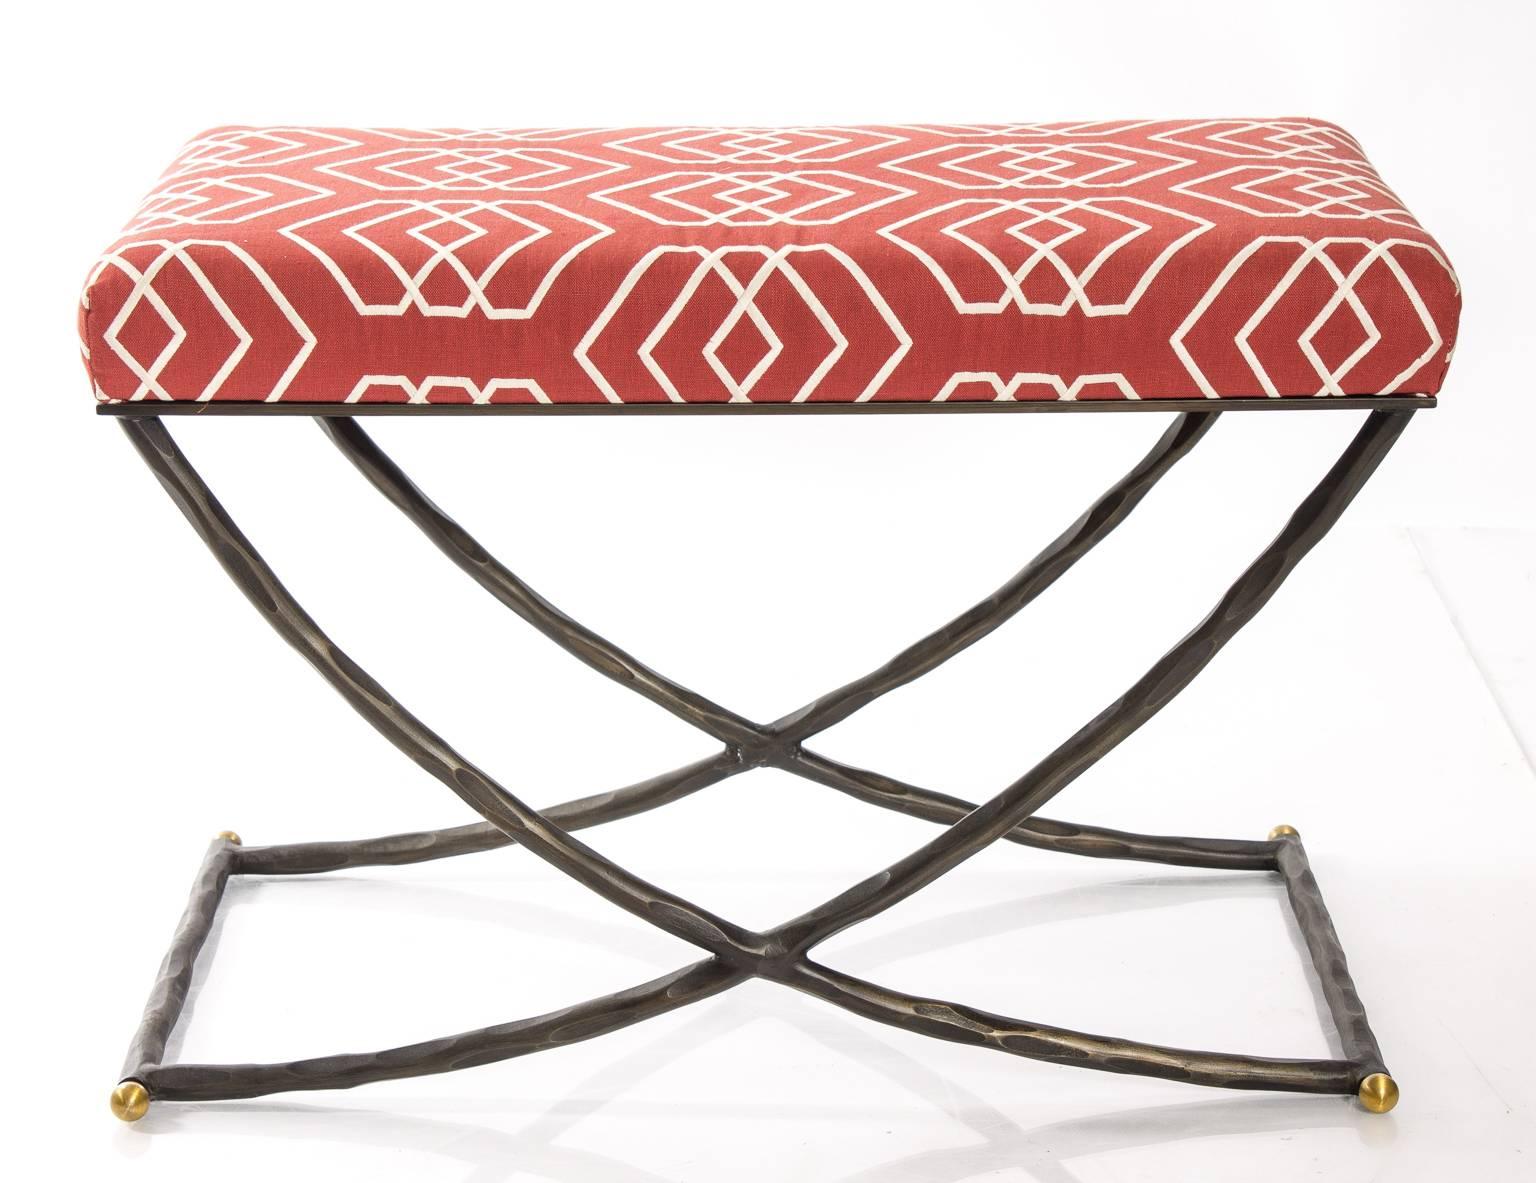 Bronzed iron X-bench with brass details. The top is upholstered in red fabric by Brunschwig & Fils.